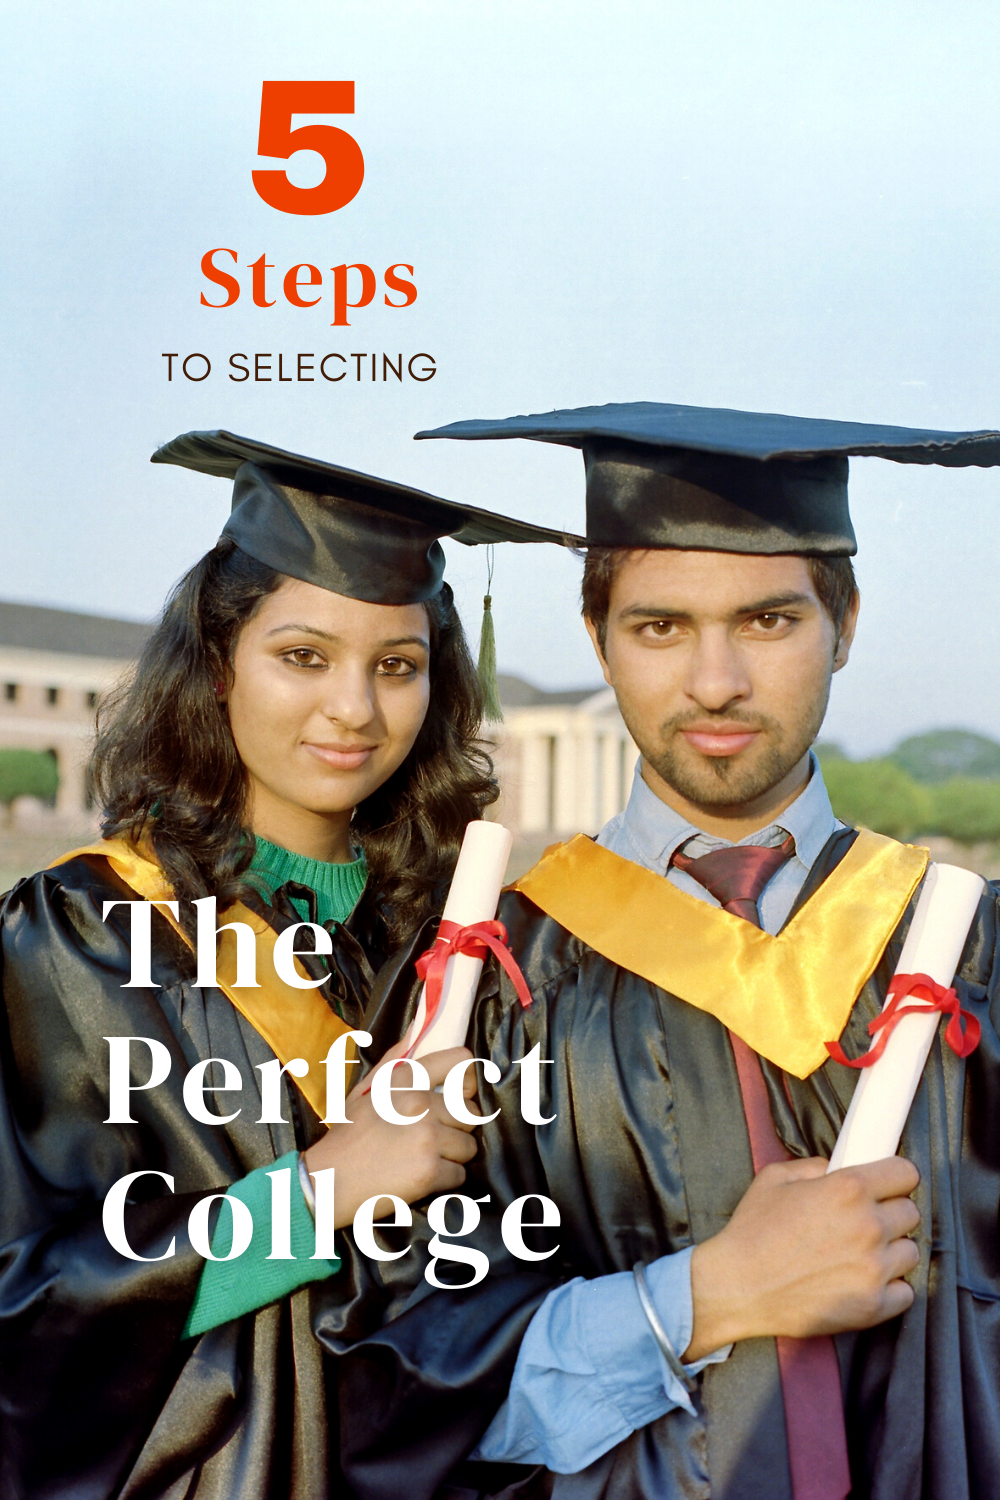 5 Steps To Selecting The Perfect College